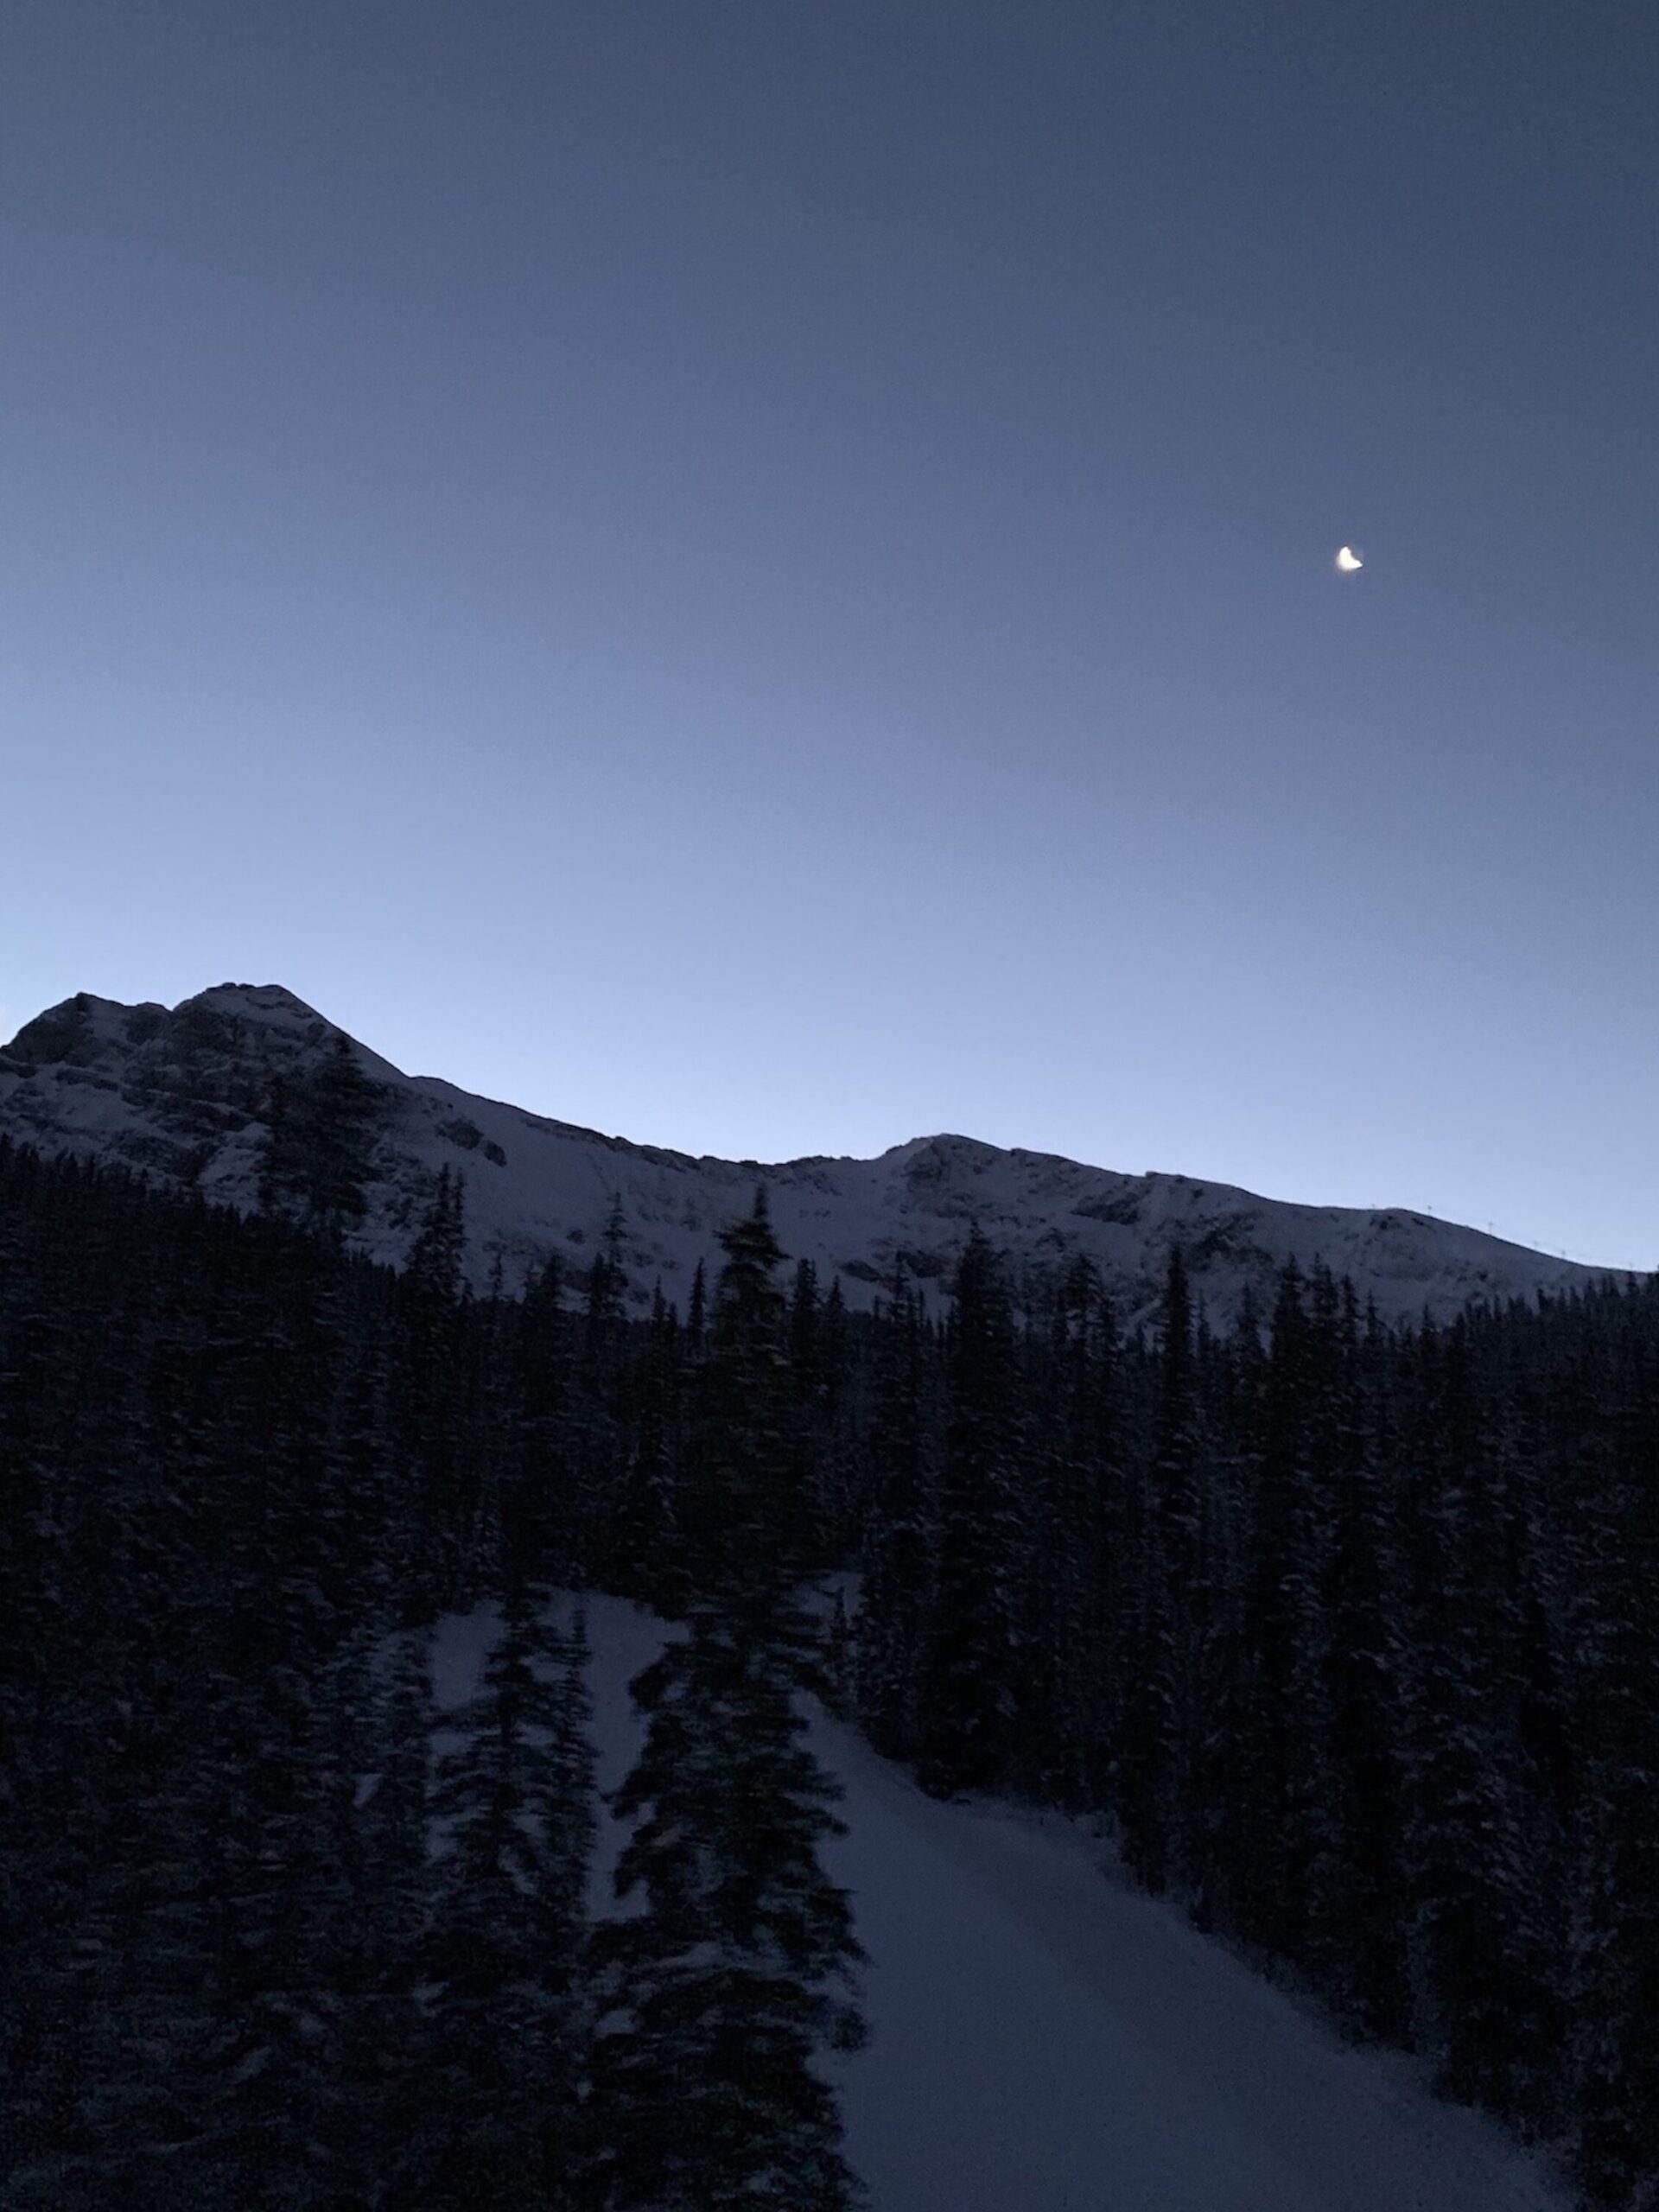 The view of the Delirium Dive at dawn with the moon above the mountains